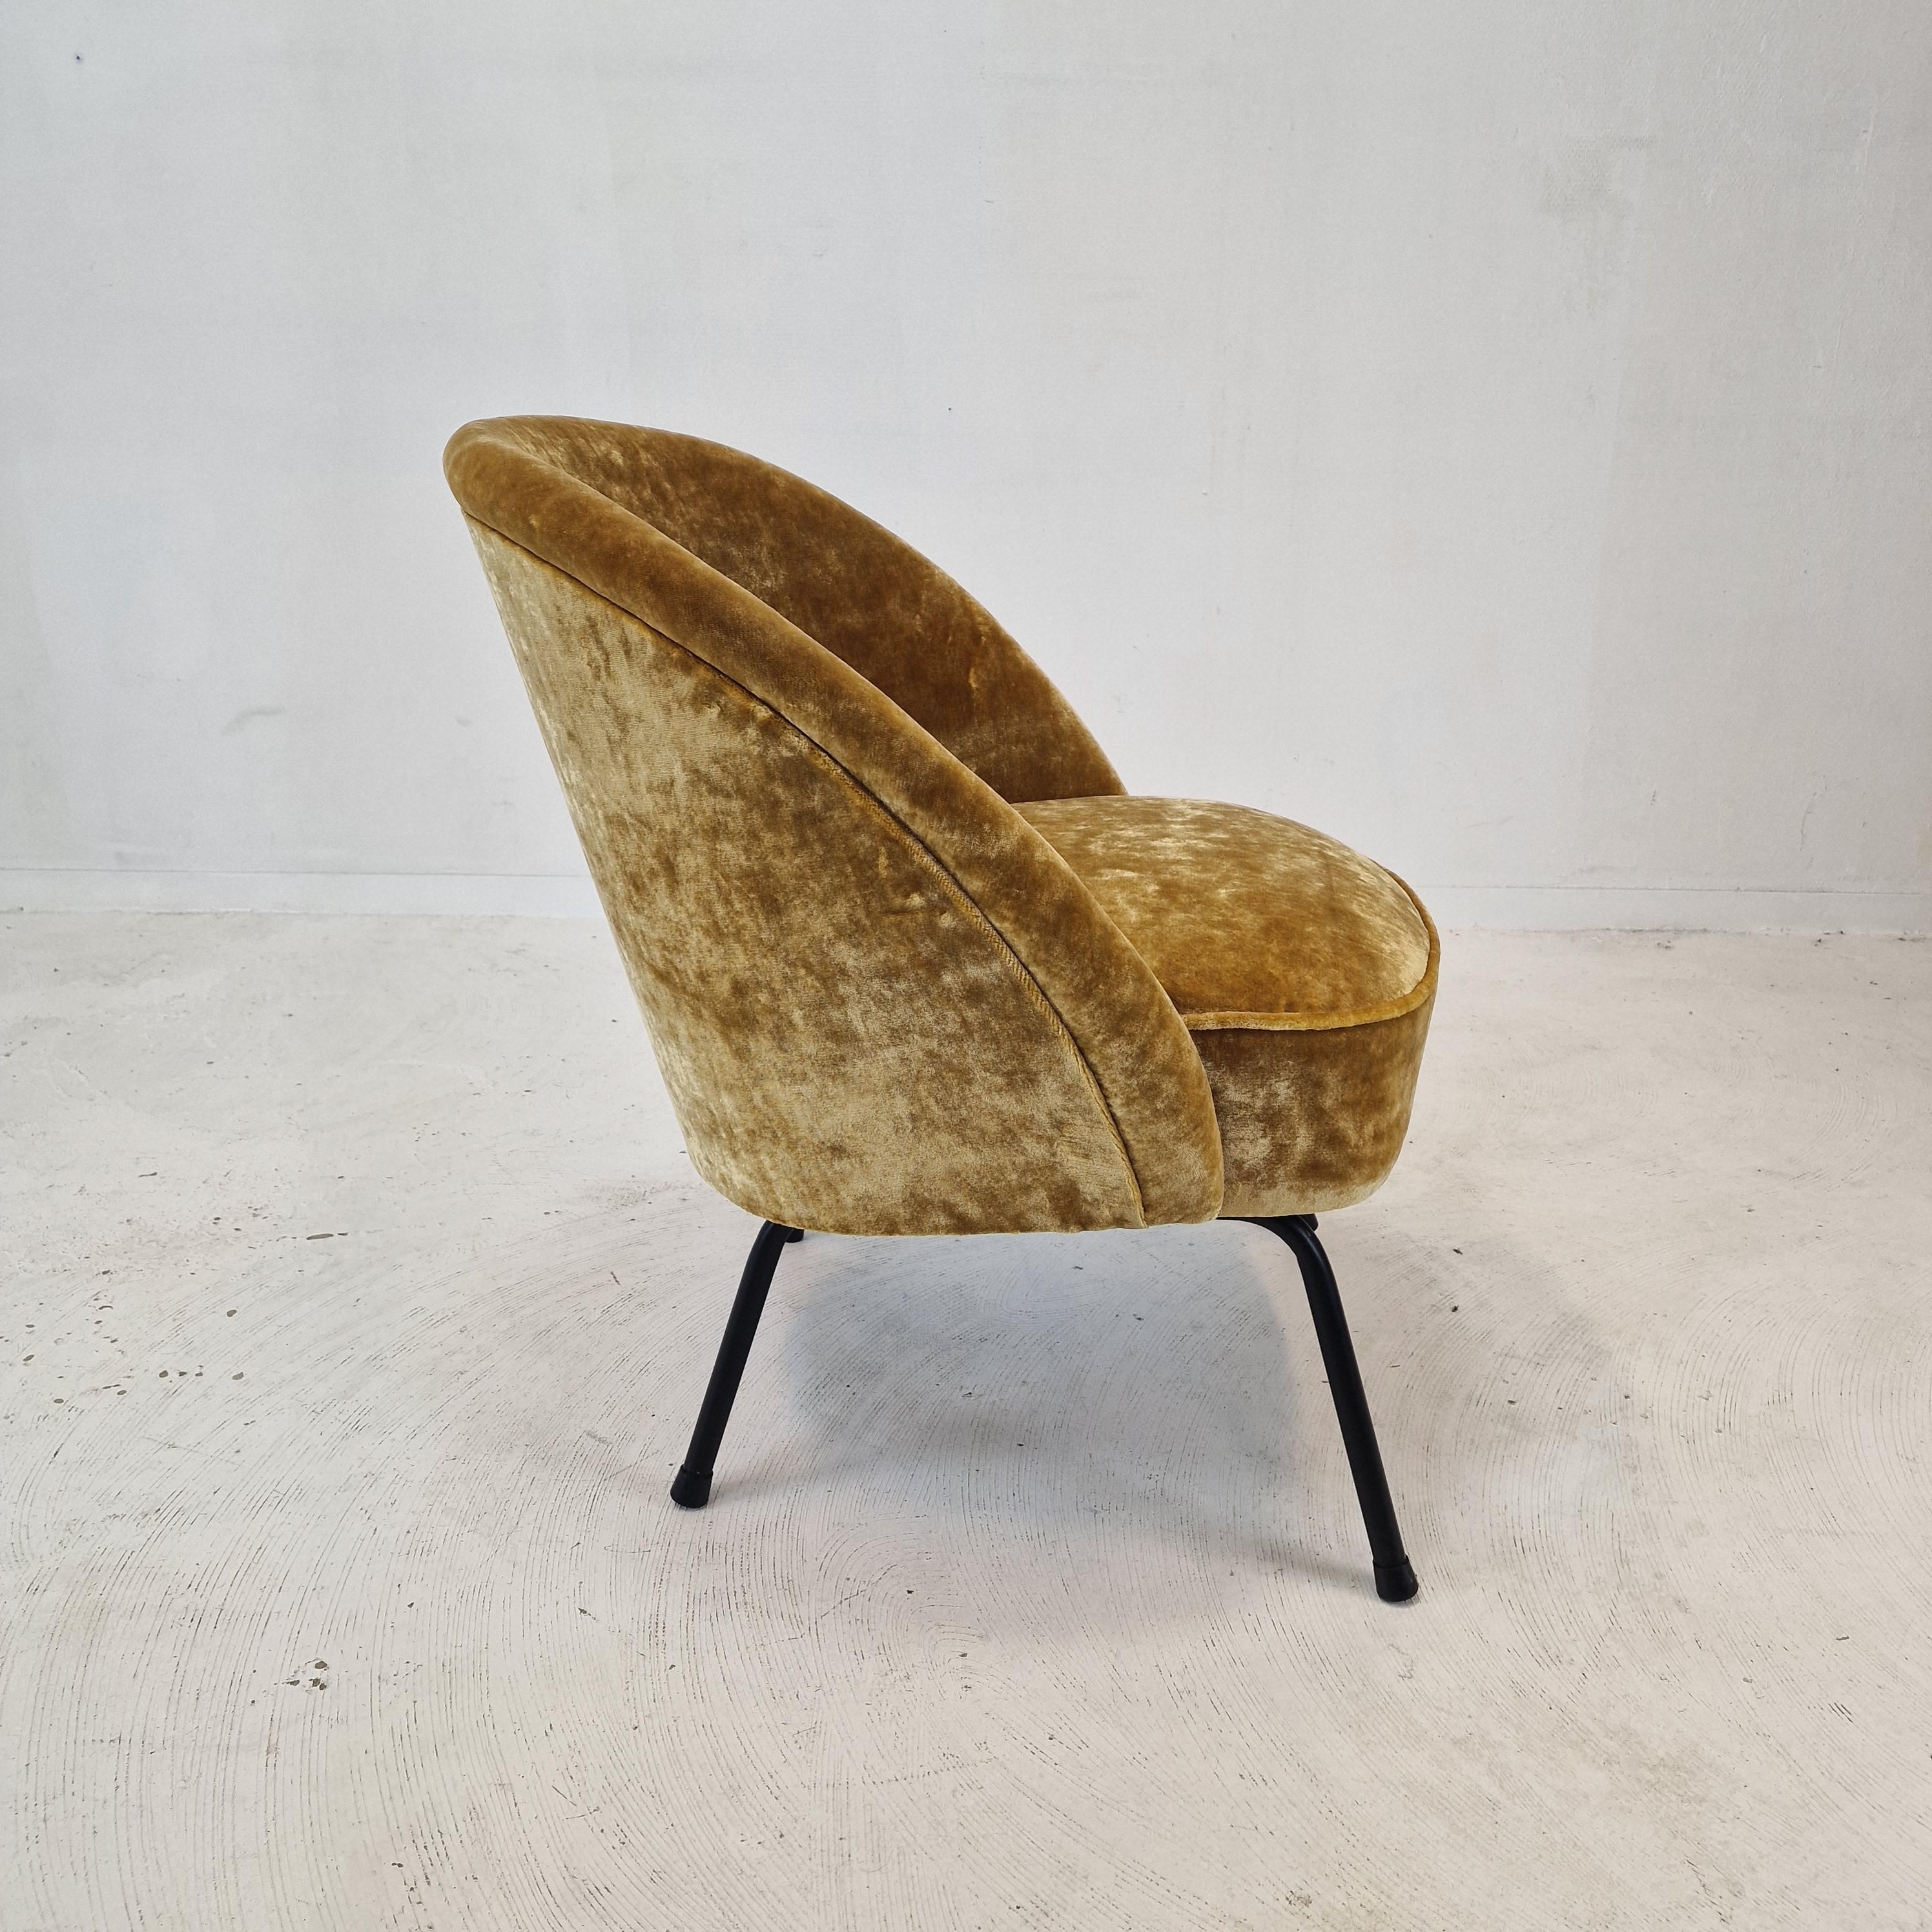 Steel Midcentury Dutch Cocktail or Side Chair, 1970s